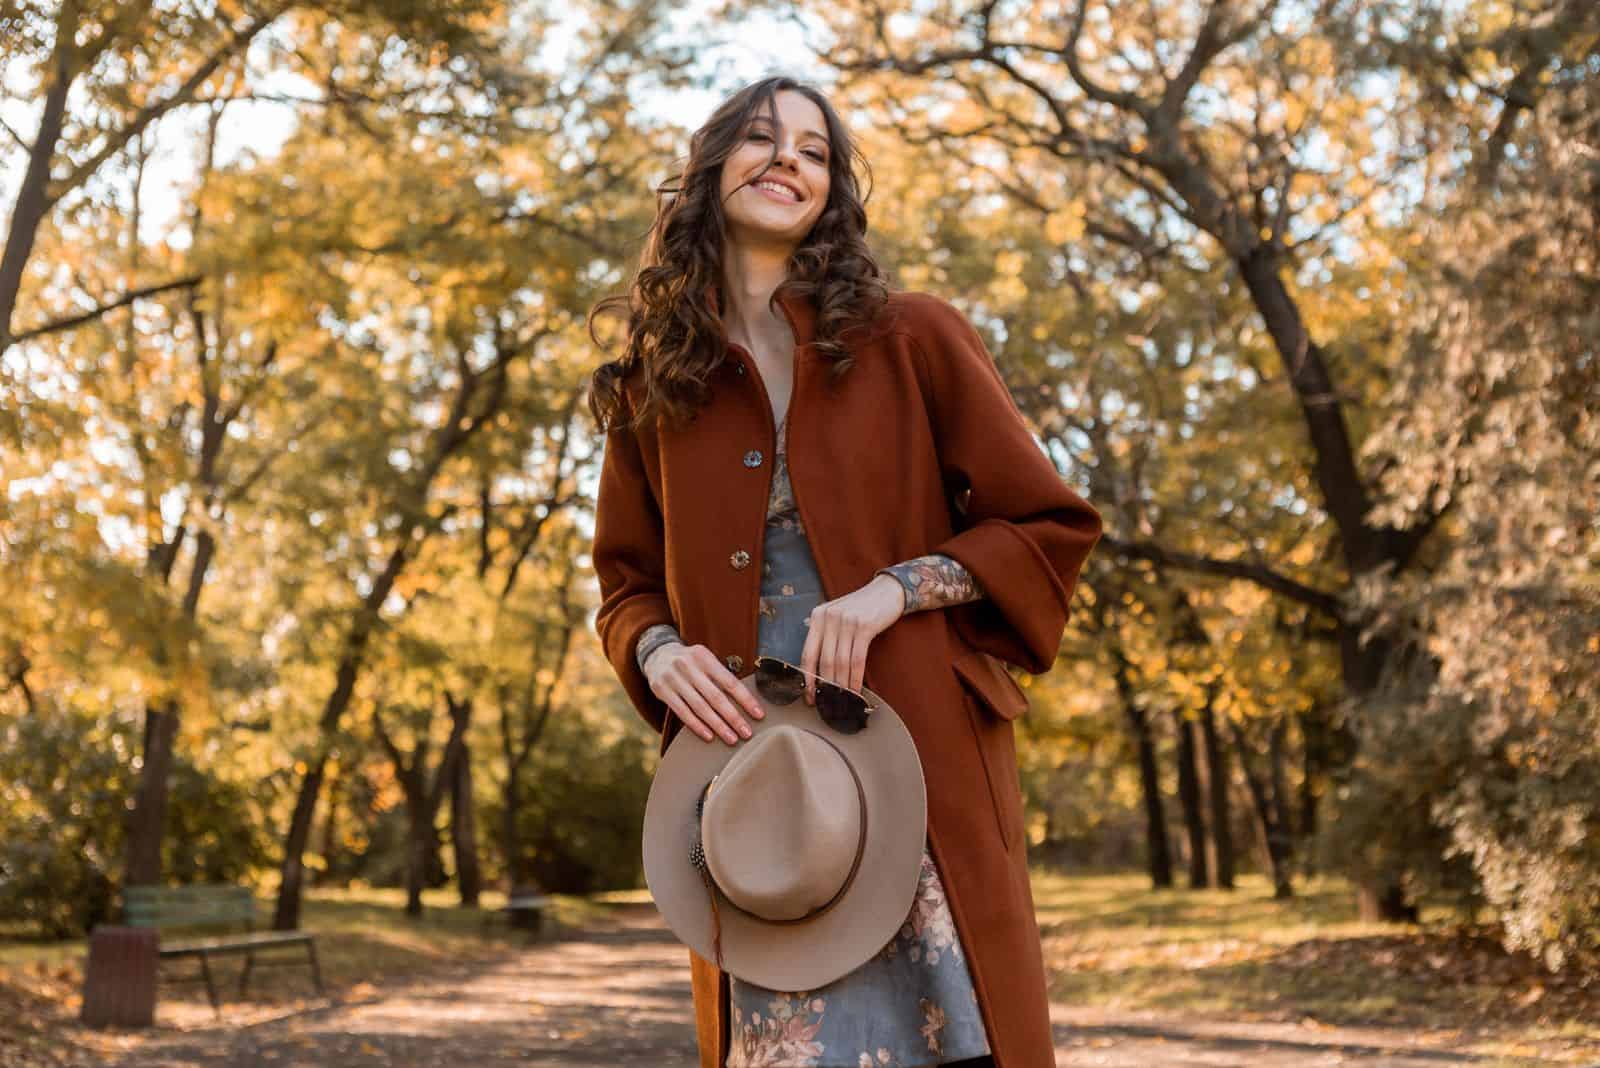 woman holding hat and sunglasses walking in park dressed in warm coat autumn